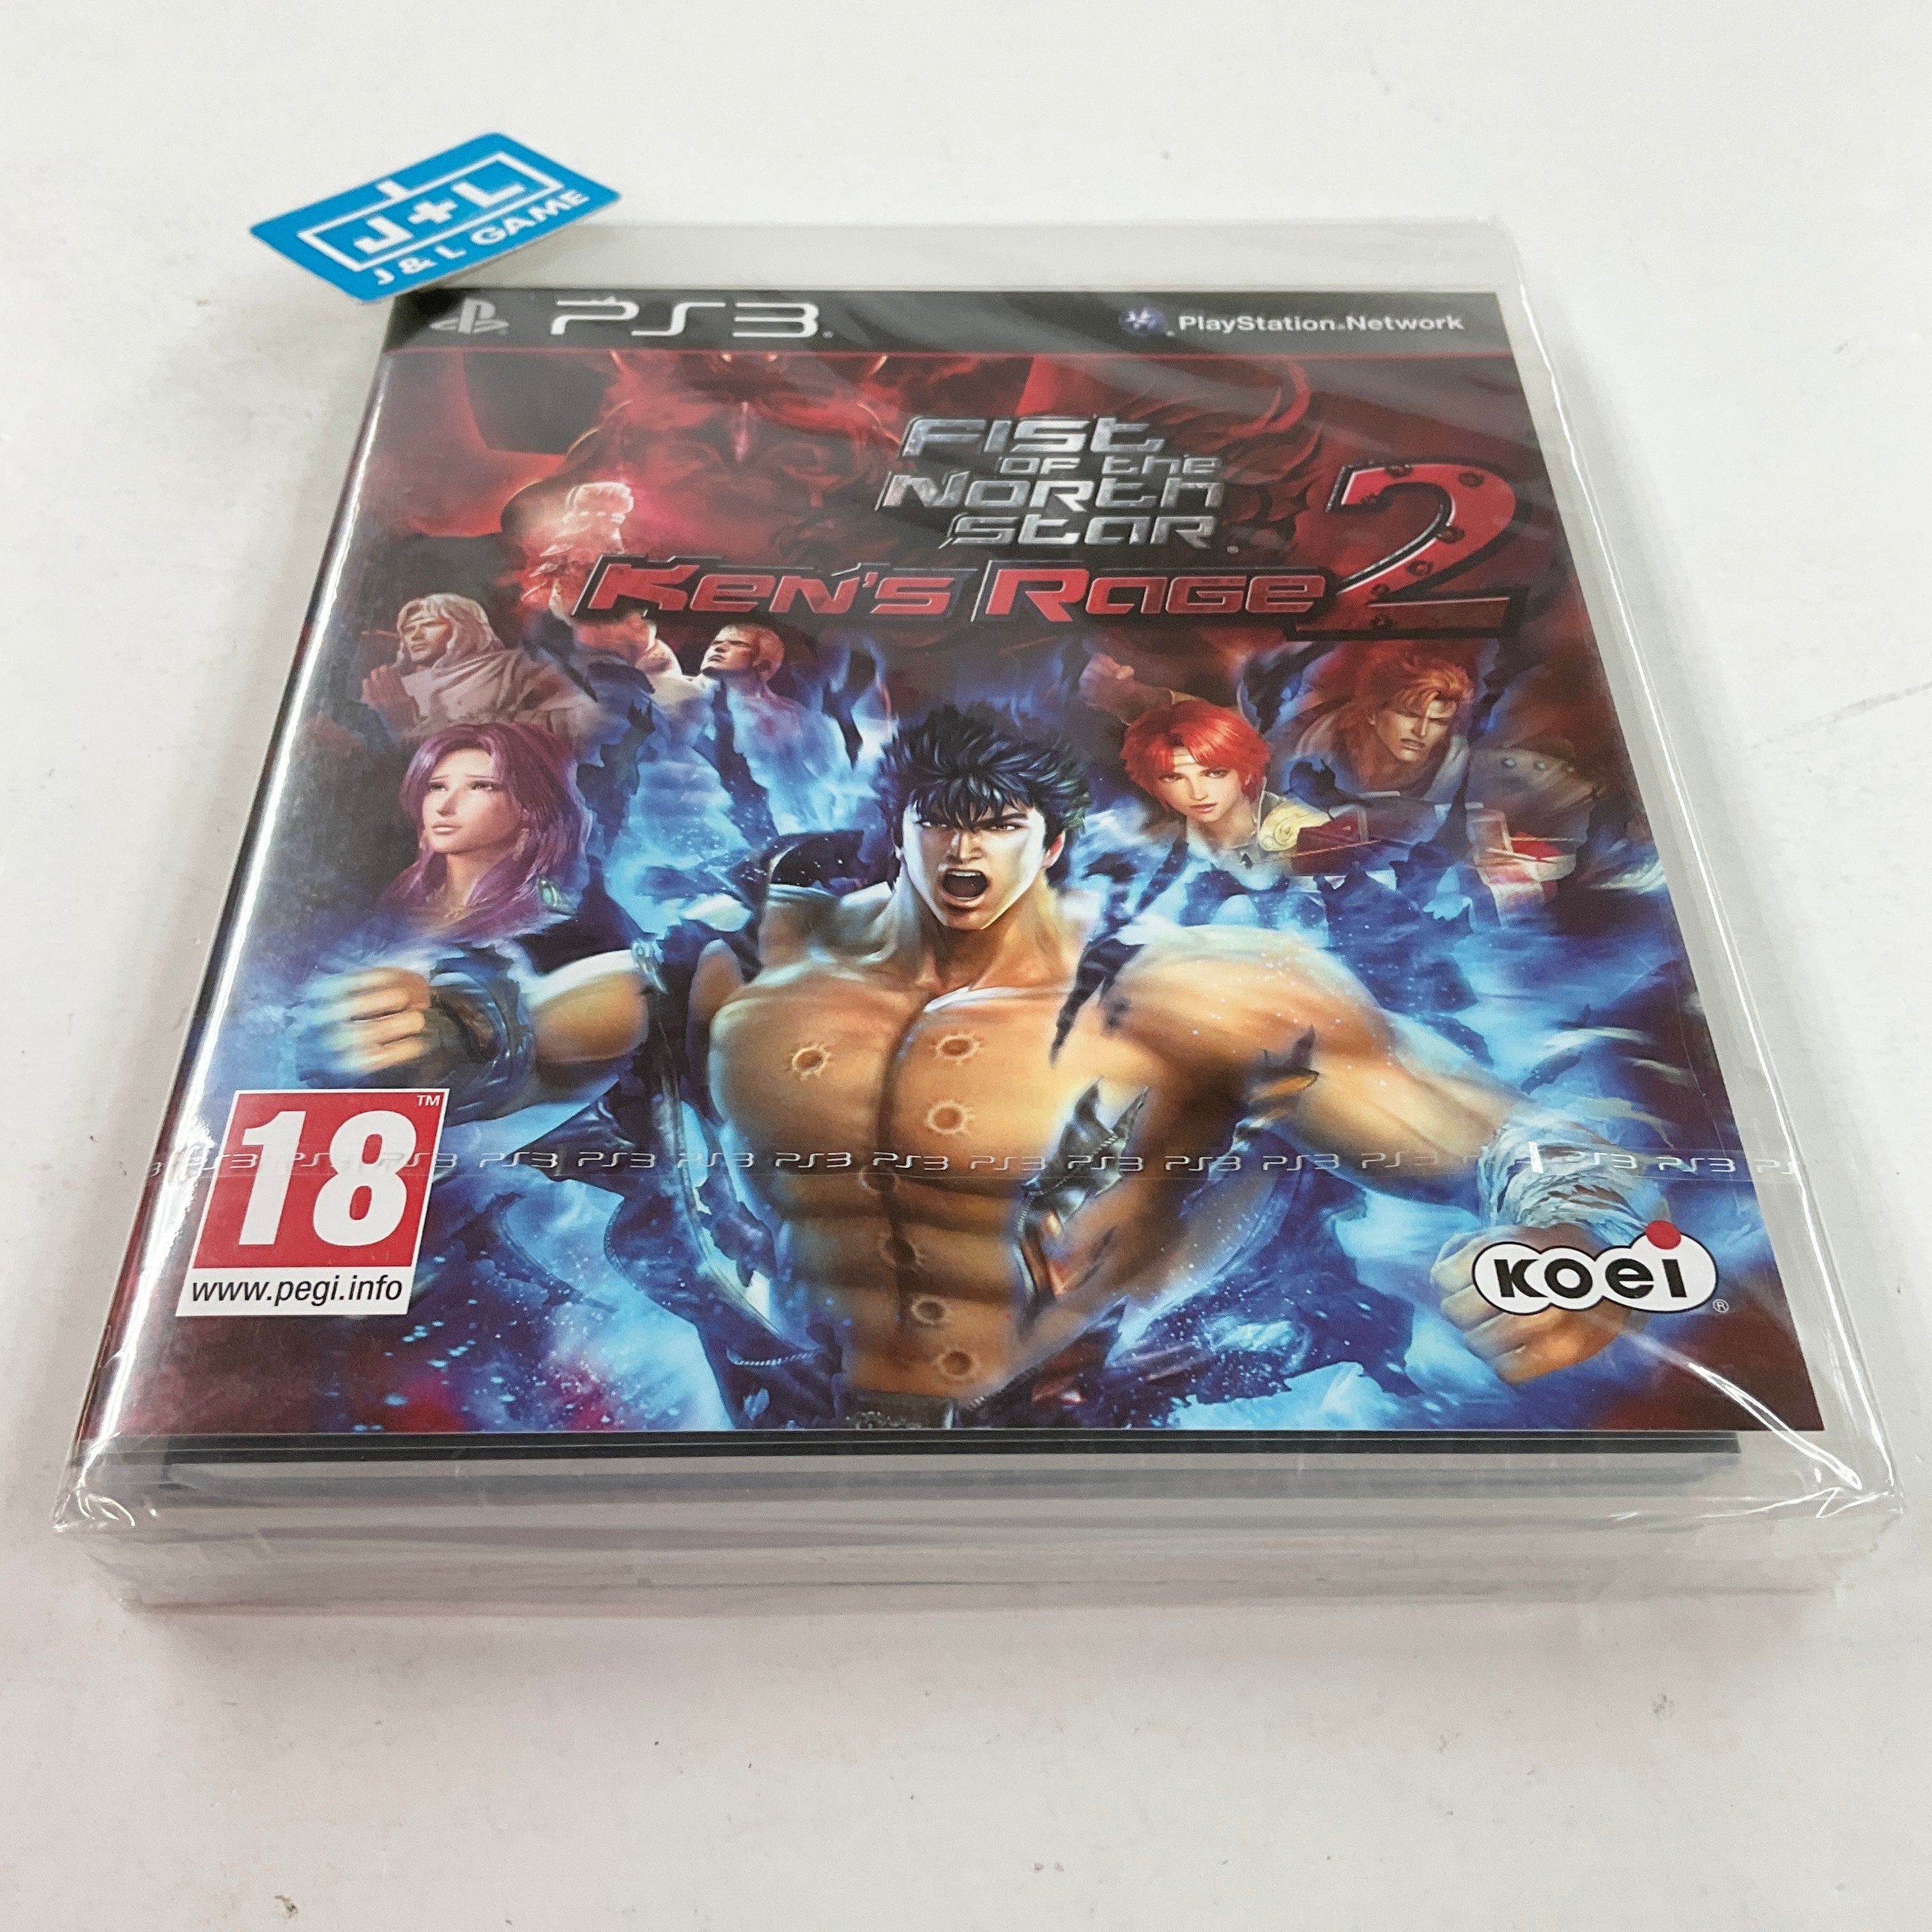 Fist of the North Star: Ken's Rage 2 - (PS3) PlayStation 3 (European Import) Video Games Koei Tecmo Games   